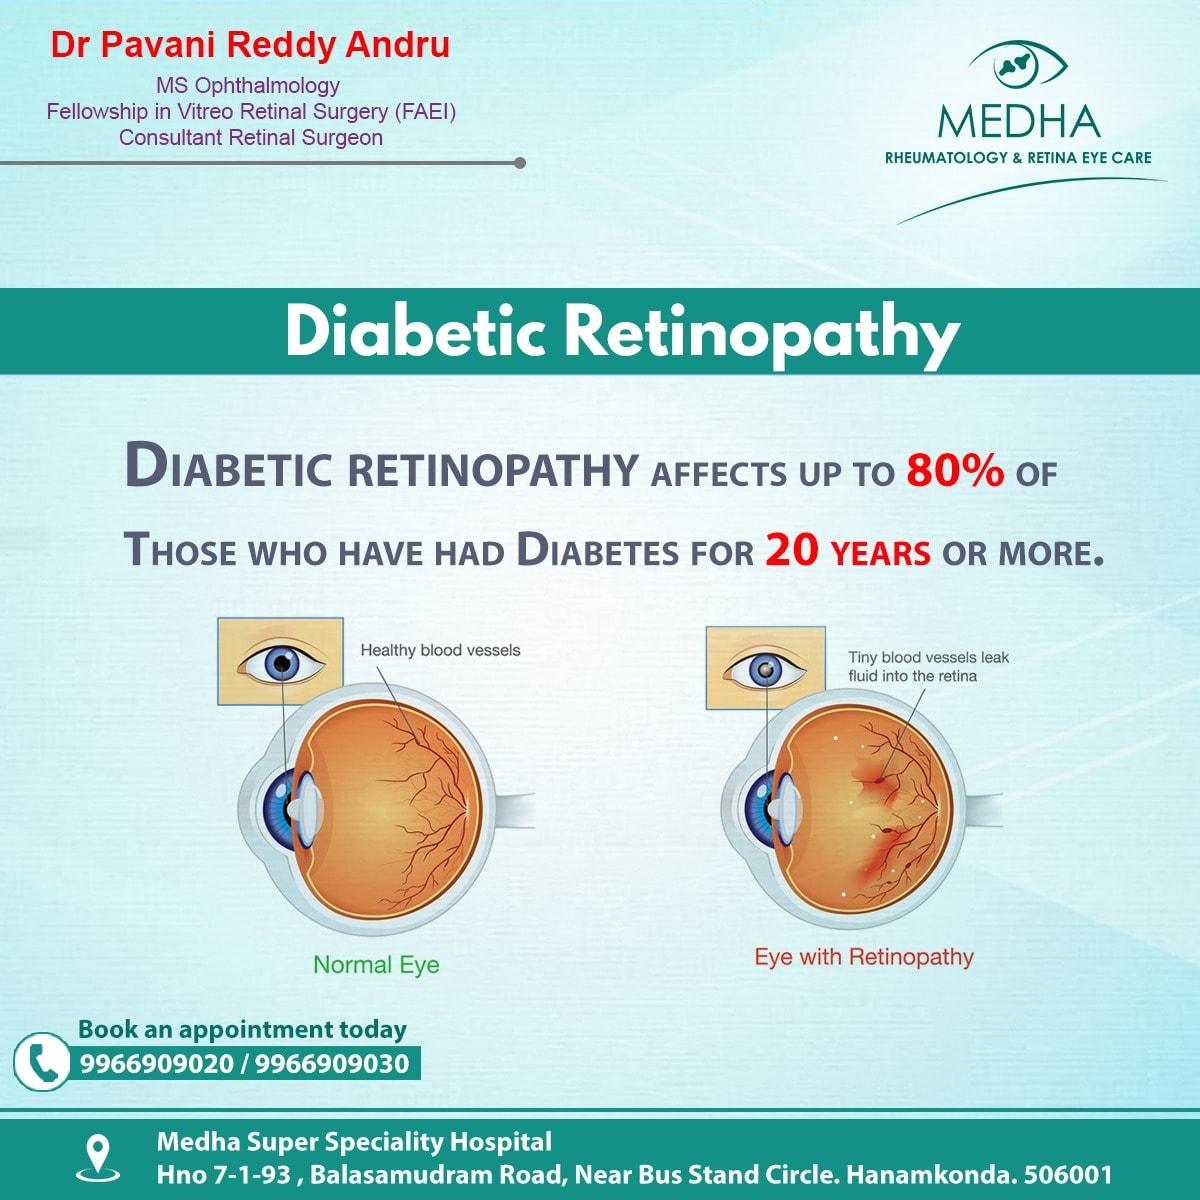 Diabetic Retinopathy Affects more than 80% of Diabetes People